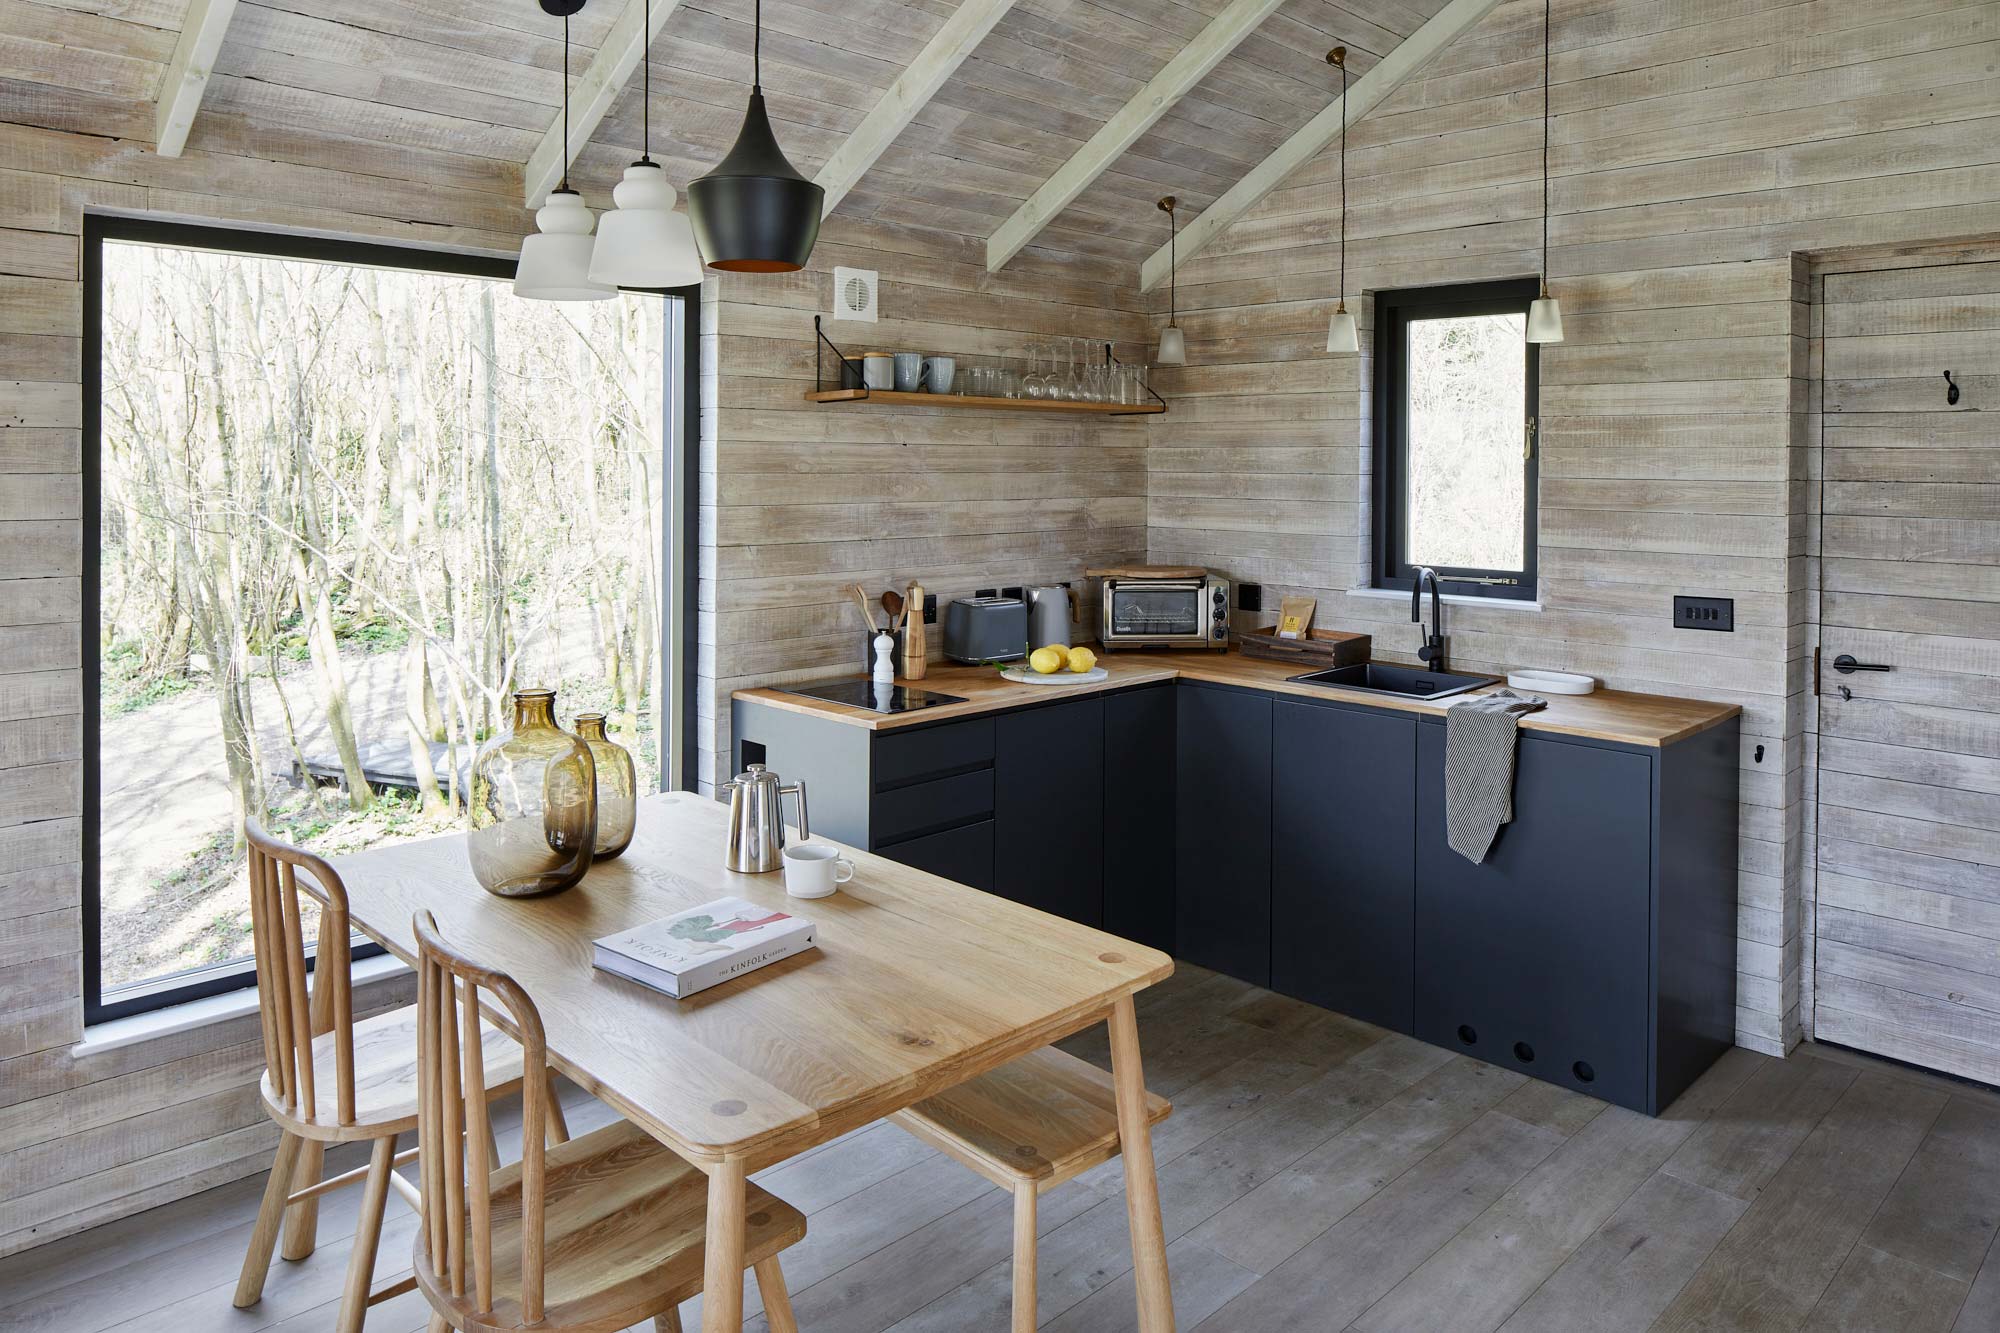 Reclaimed cladded treehouse kitchen